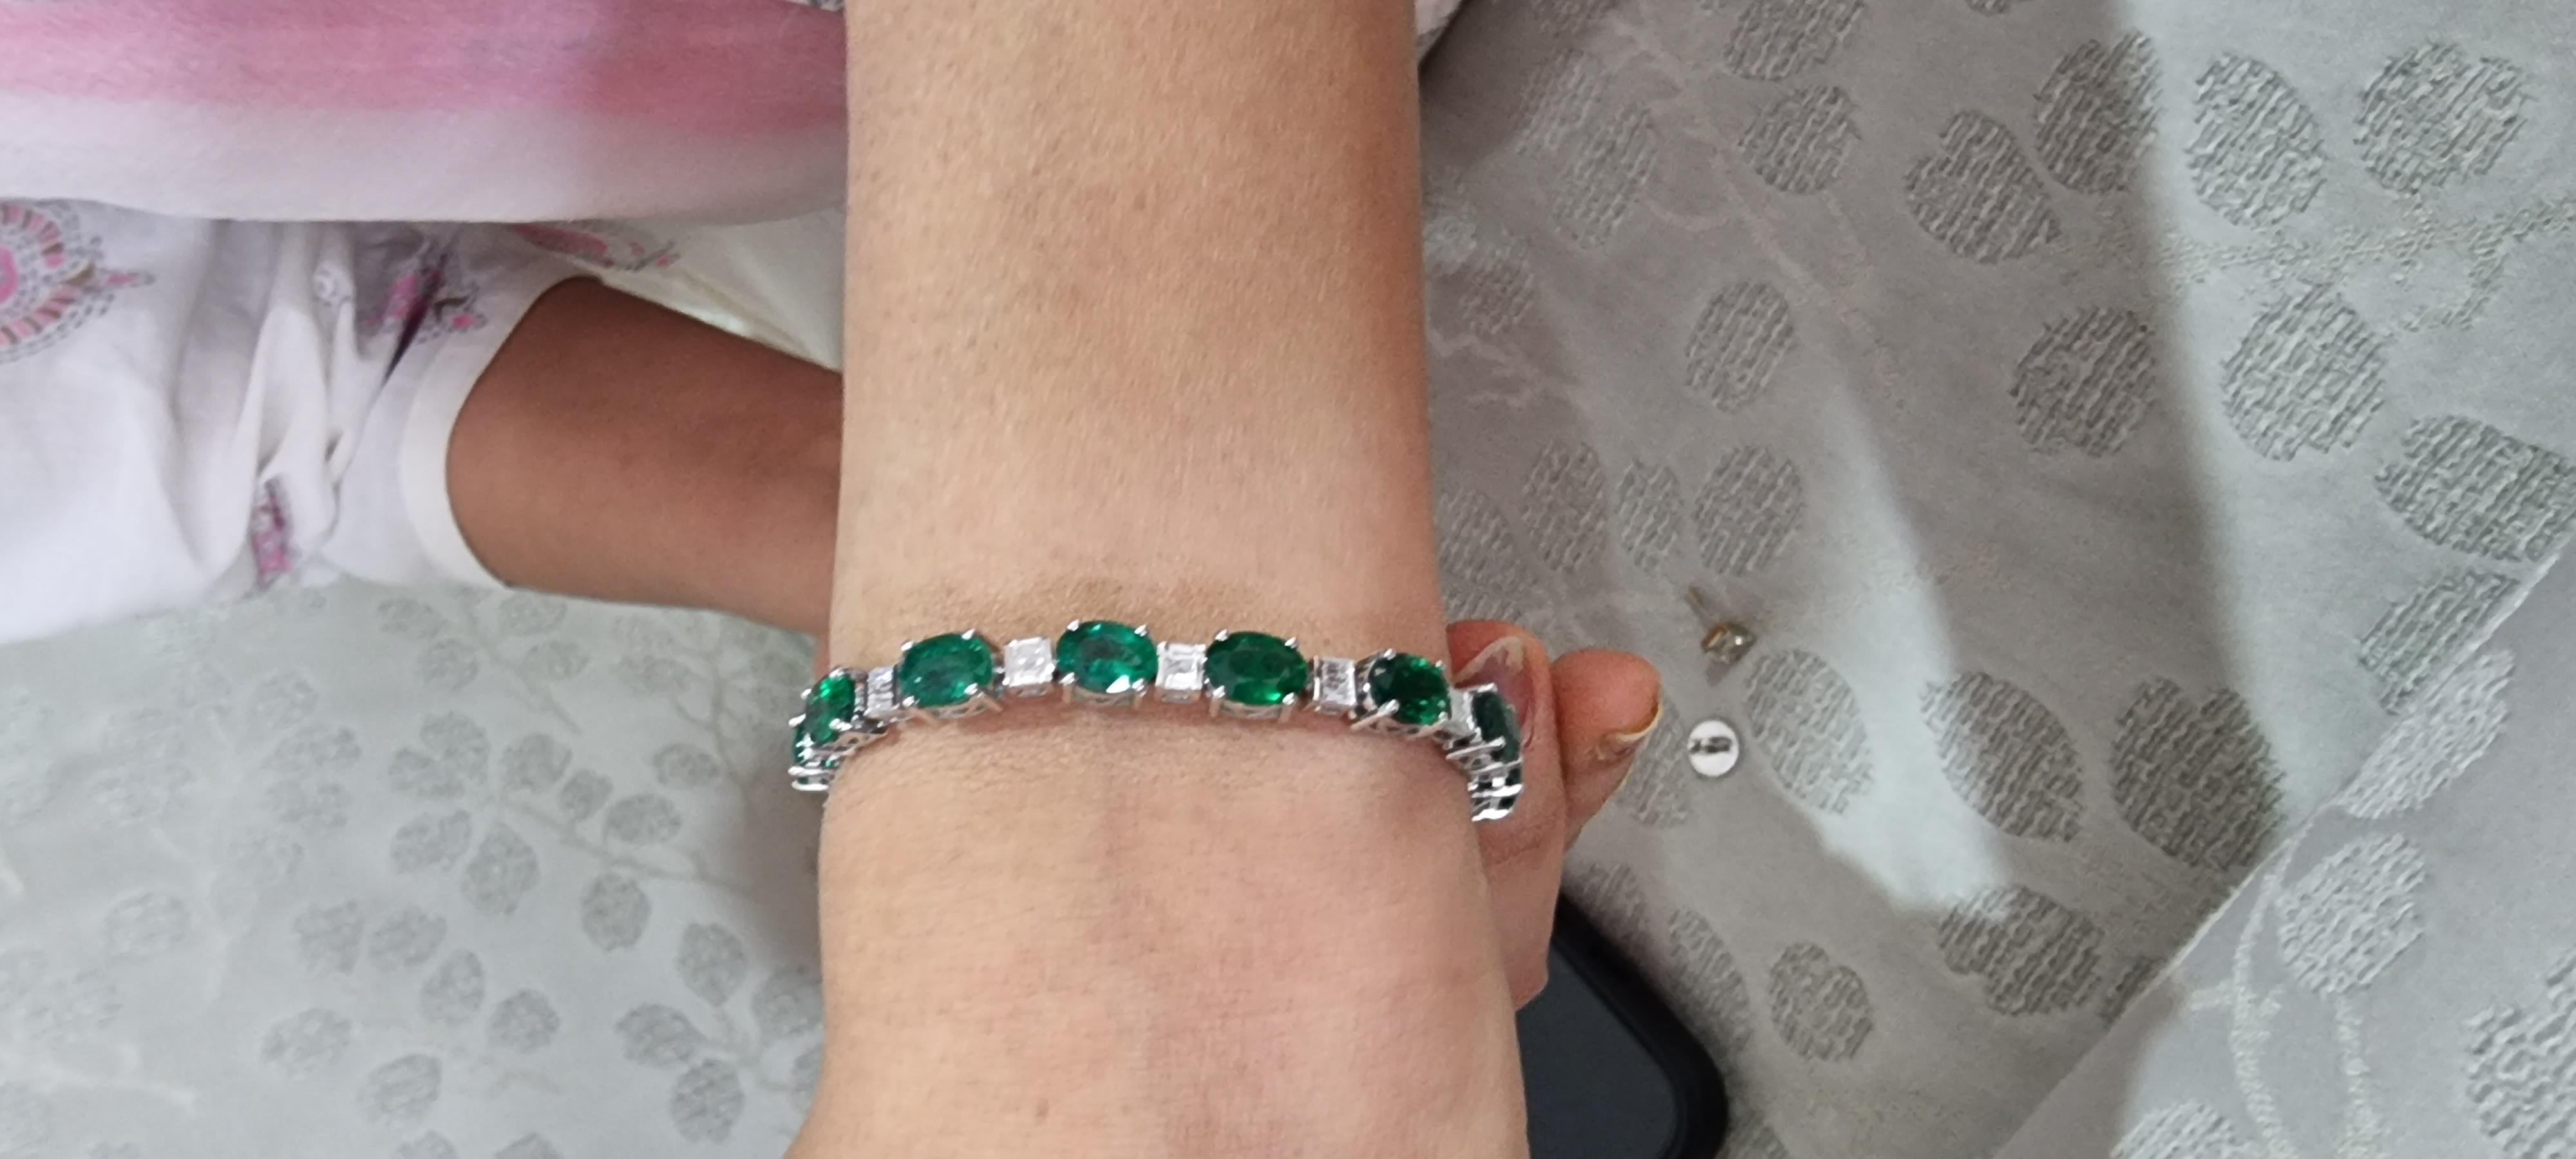  Zambian Emerald 13.06cts Tennis Bracelet with Diamonds 0.74cts and 14k Gold For Sale 1